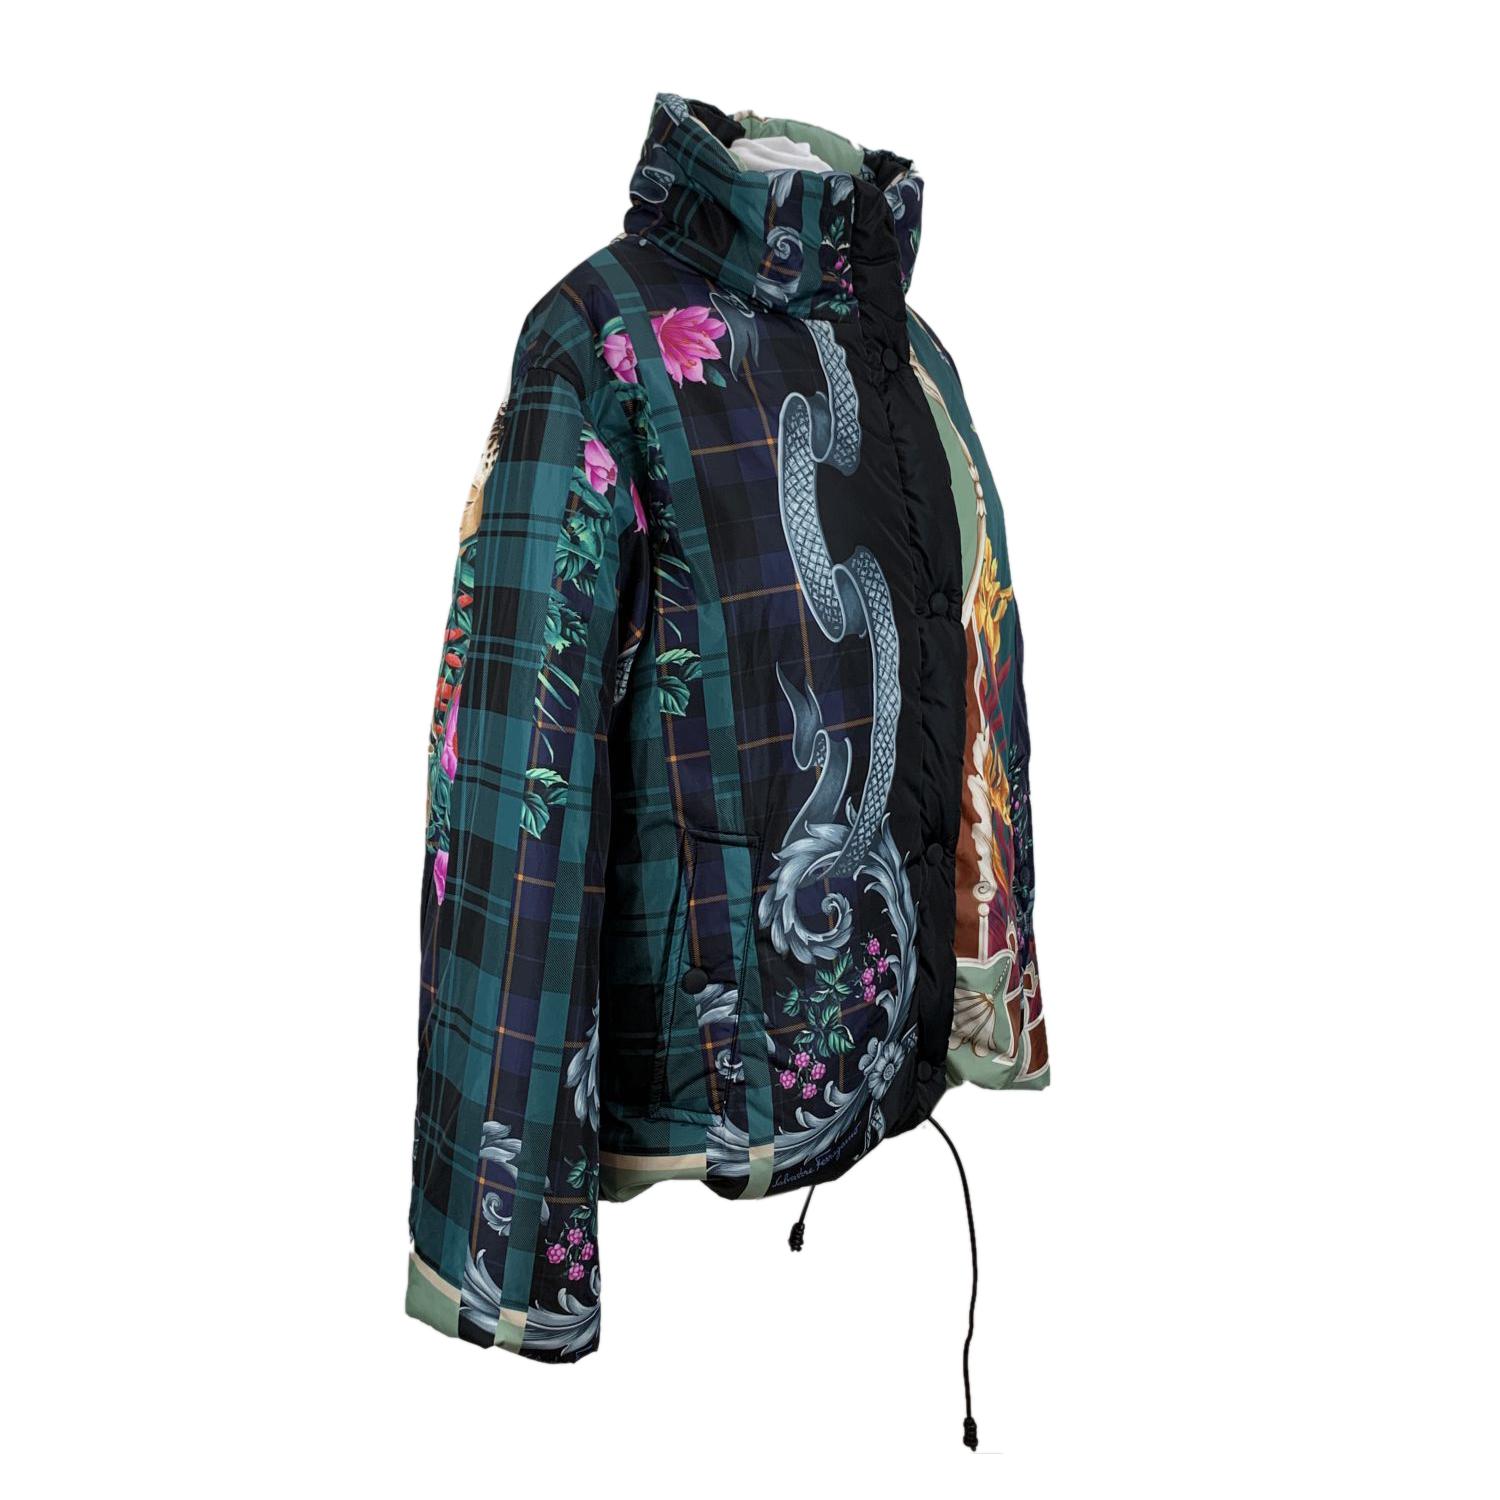 Salvatore Ferragamo multi print puffer jacket. It features a stand up collar, button closure on the front, long sleeve styling and a drawstring hem. 2 pockets on the waist. Composition: 100% Polyamide. Filling: 100% Polyester. Size: 44 IT (The size